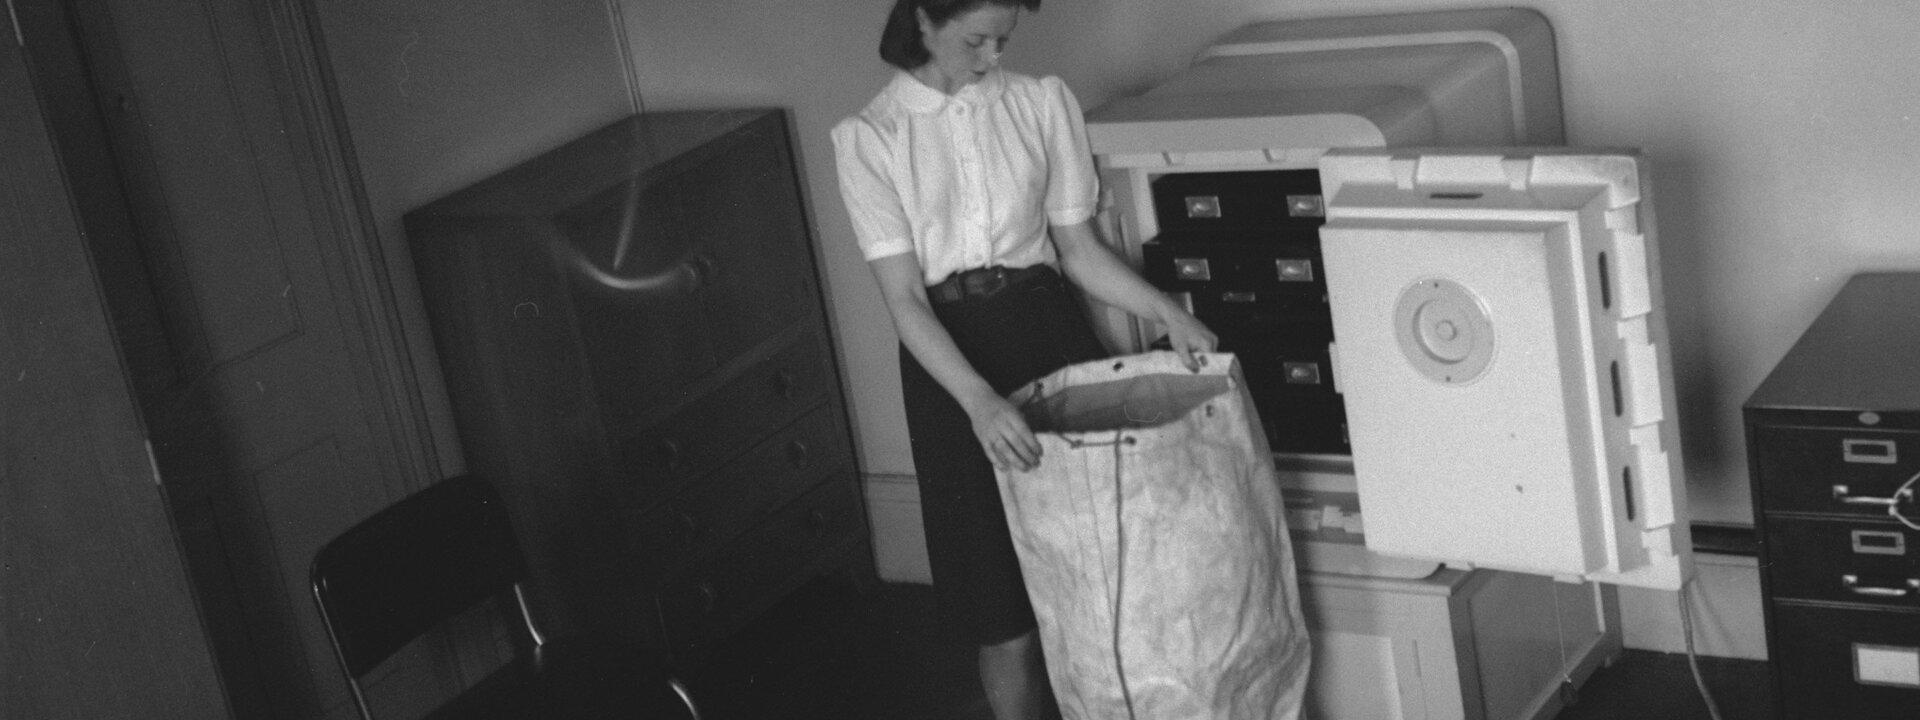 Woman taking diamonds from a safe